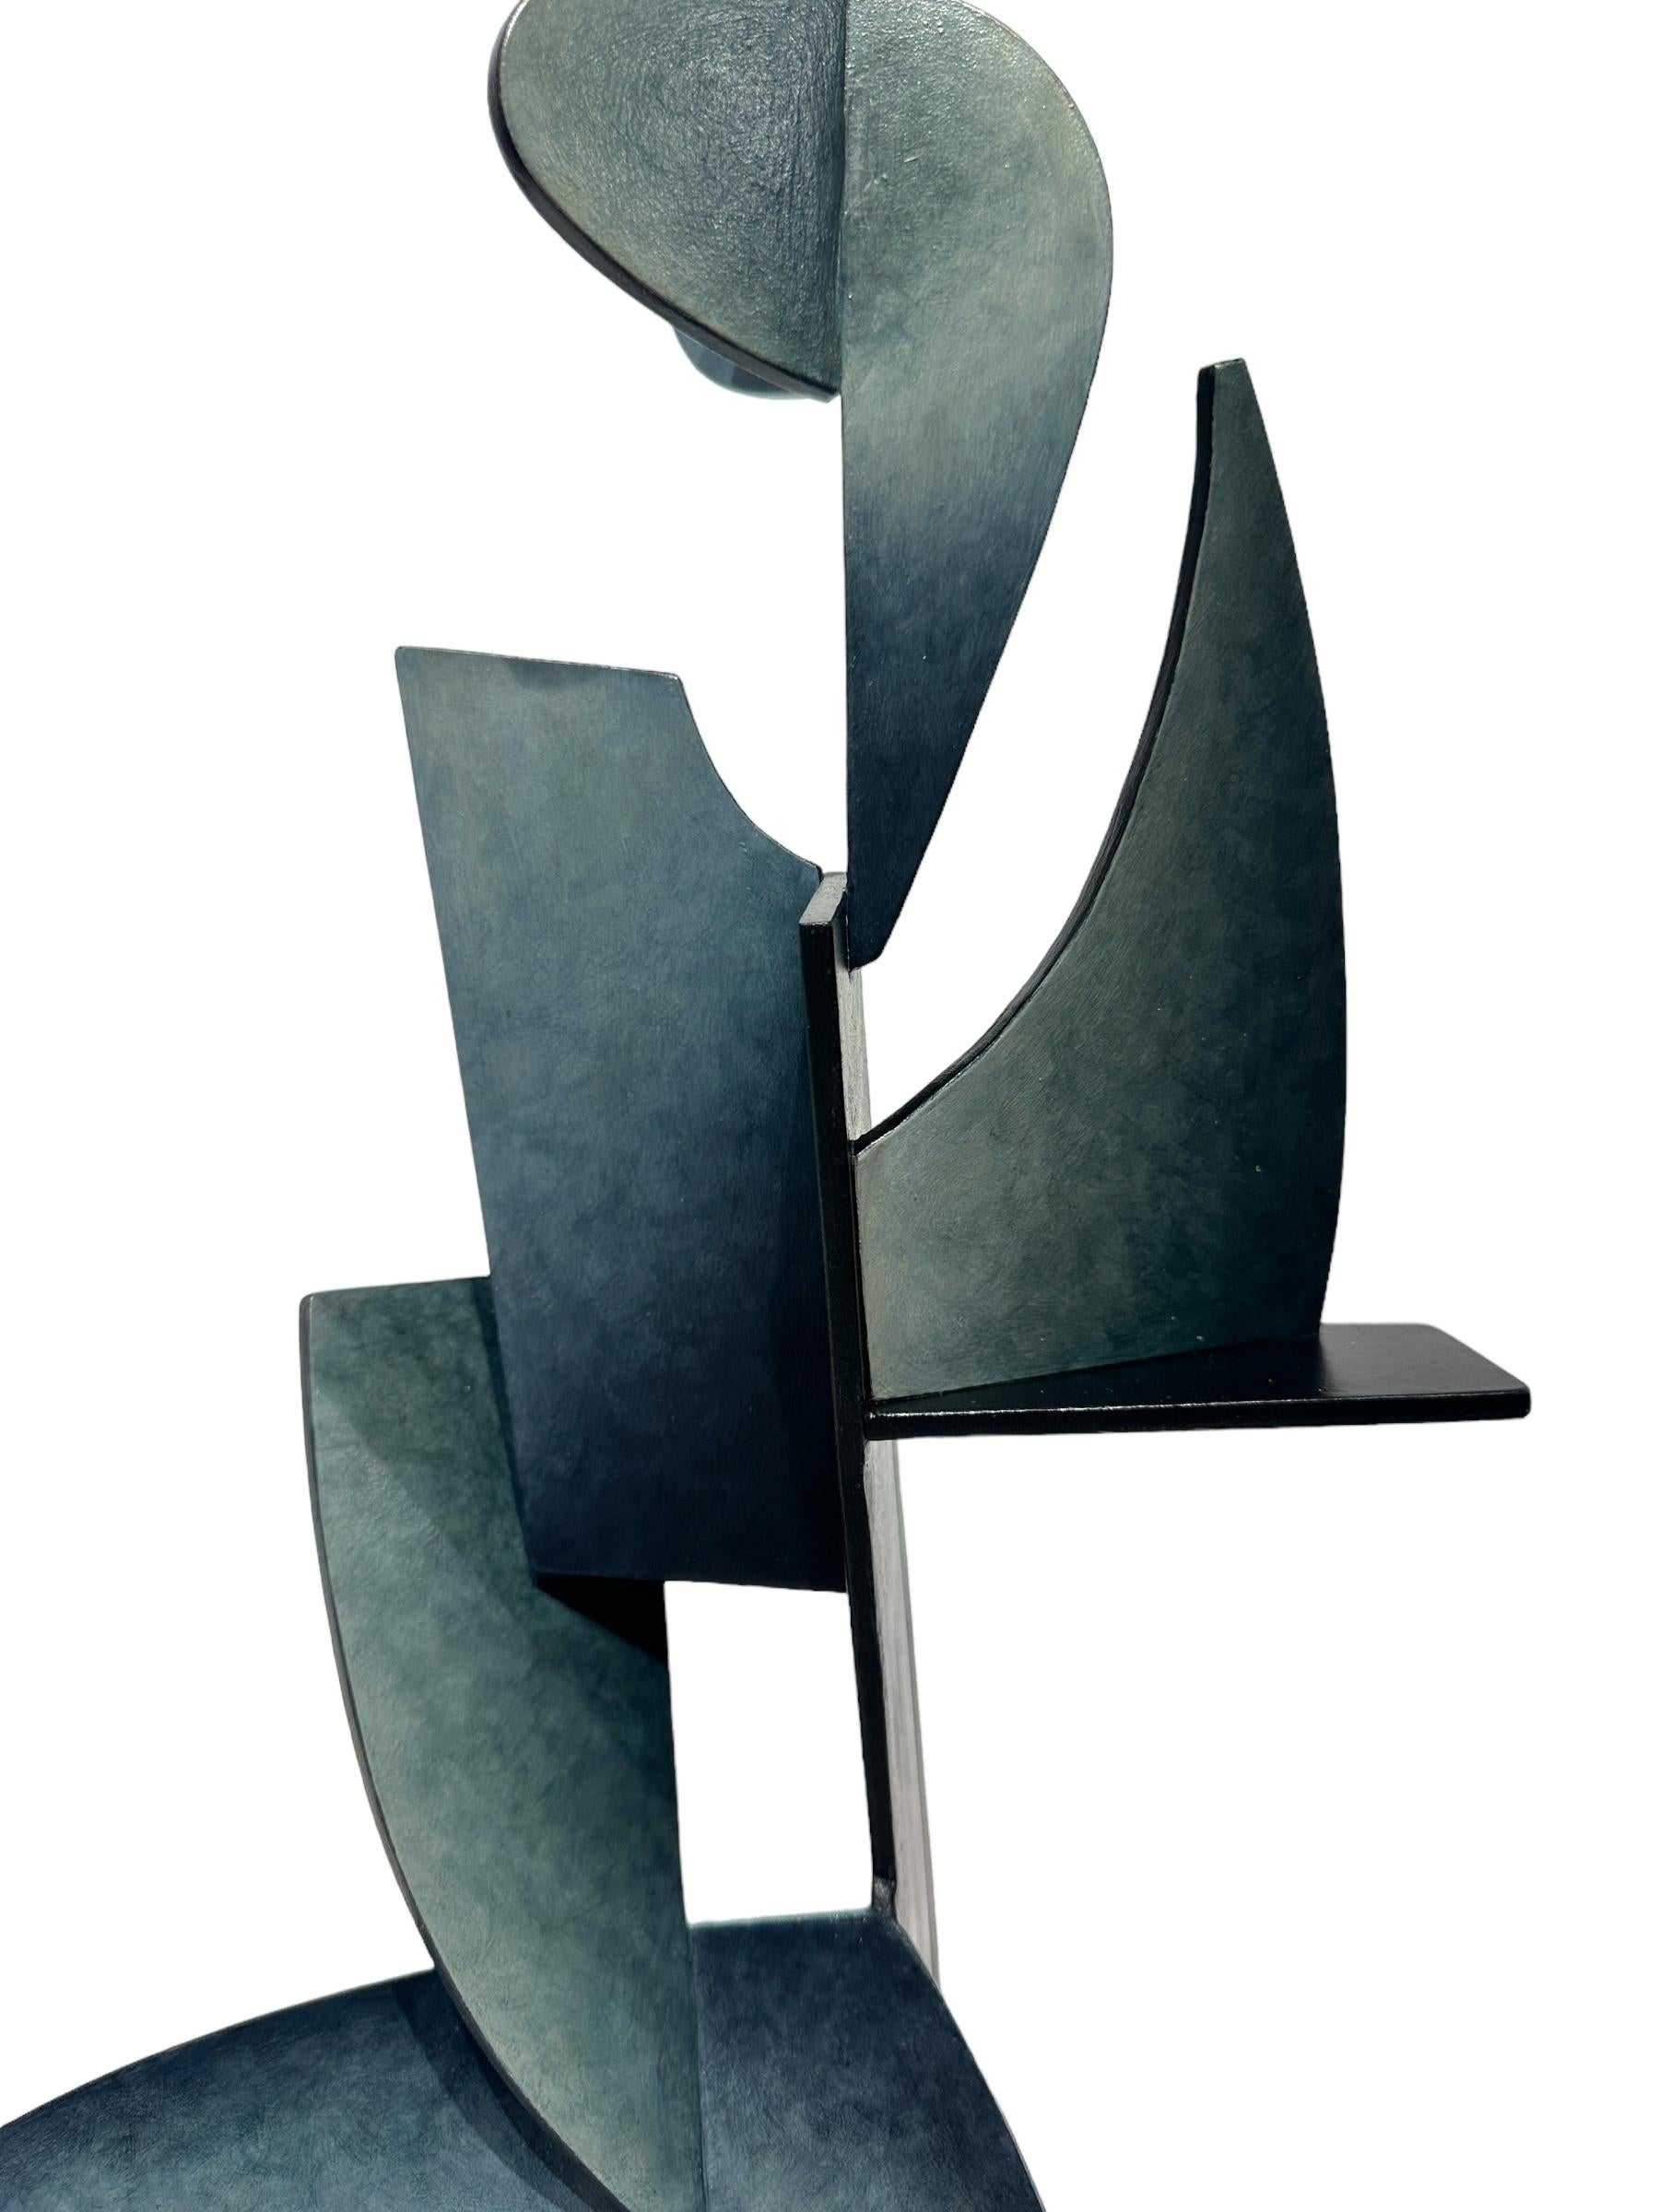 Spirit - Abstract Geometric Form, Hand Painted, Welded Steel Sculpture  For Sale 2